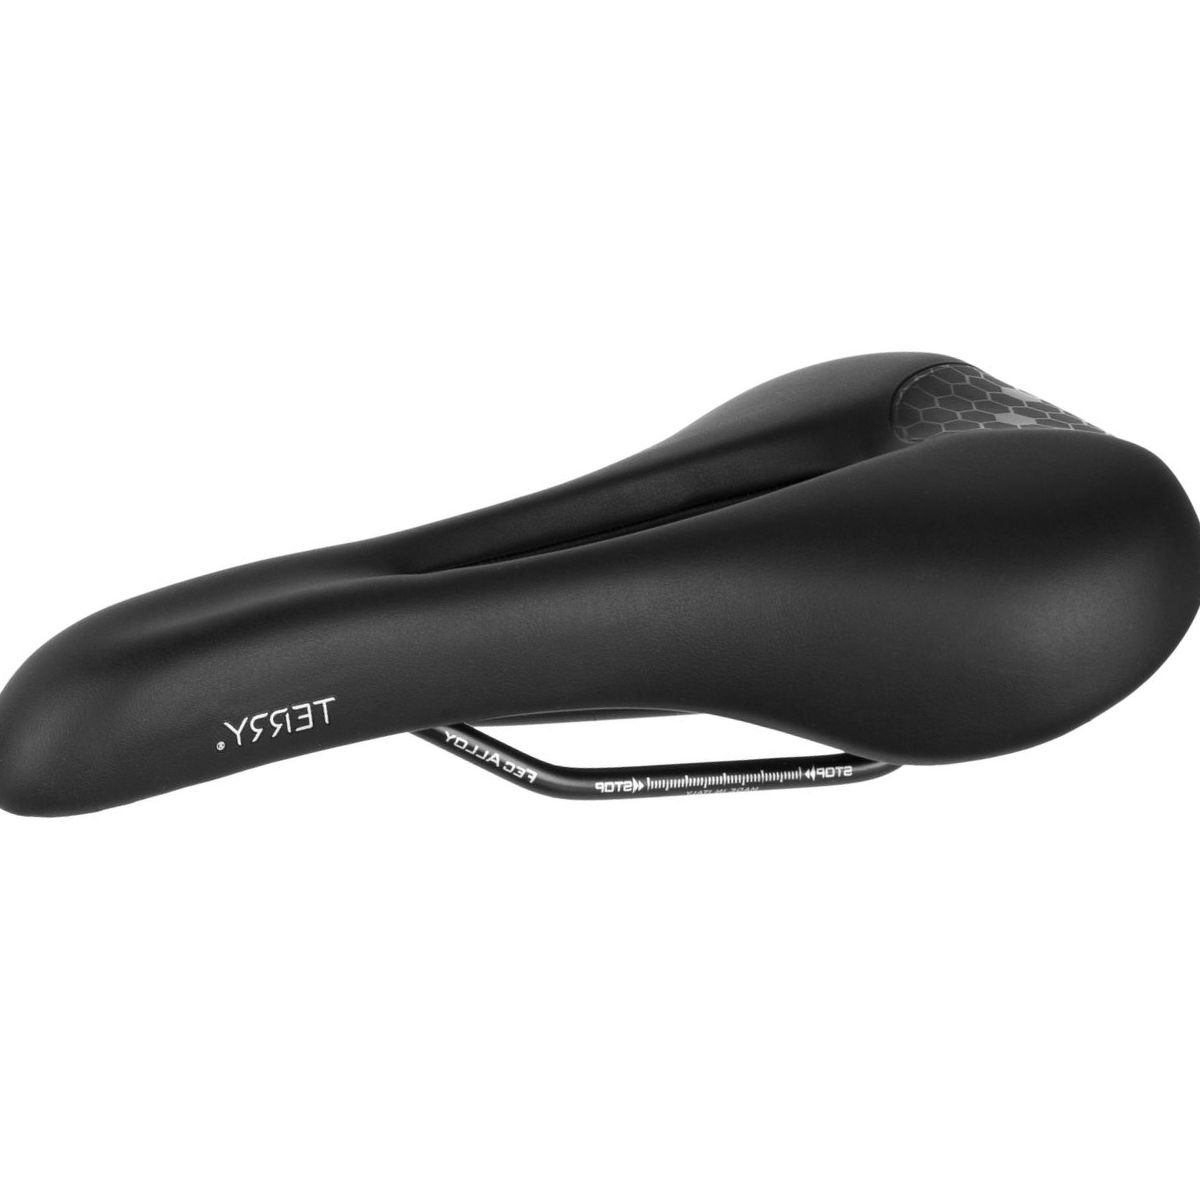 Terry Bicycles Fly Cromoly Saddle - Men's